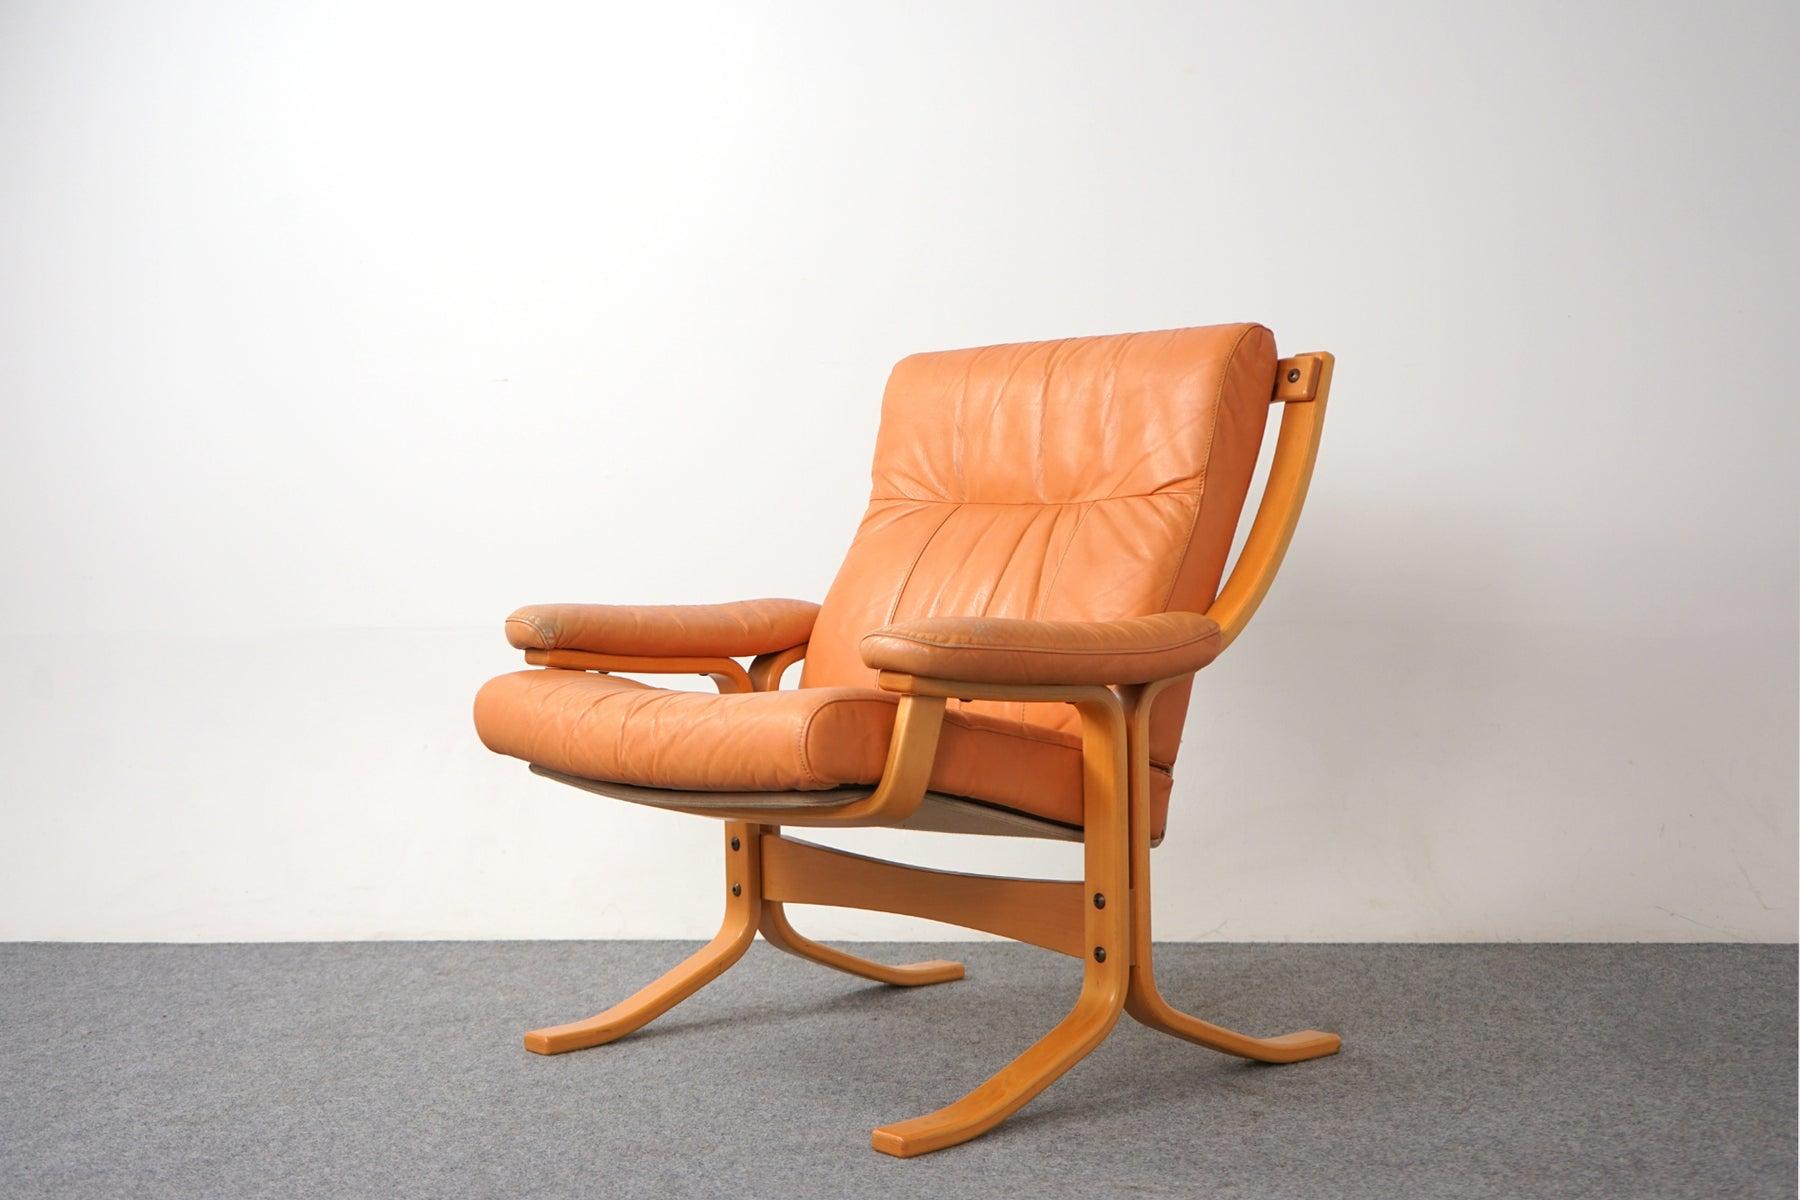 Beech wood and leather Scandinavian easy chair for Ekornes circa 1970's. Bent plywood frame supports an extremely comfortable hammock style floating seat. Original leather upholstery shows some wear. Great construction and quality.

Settle in with